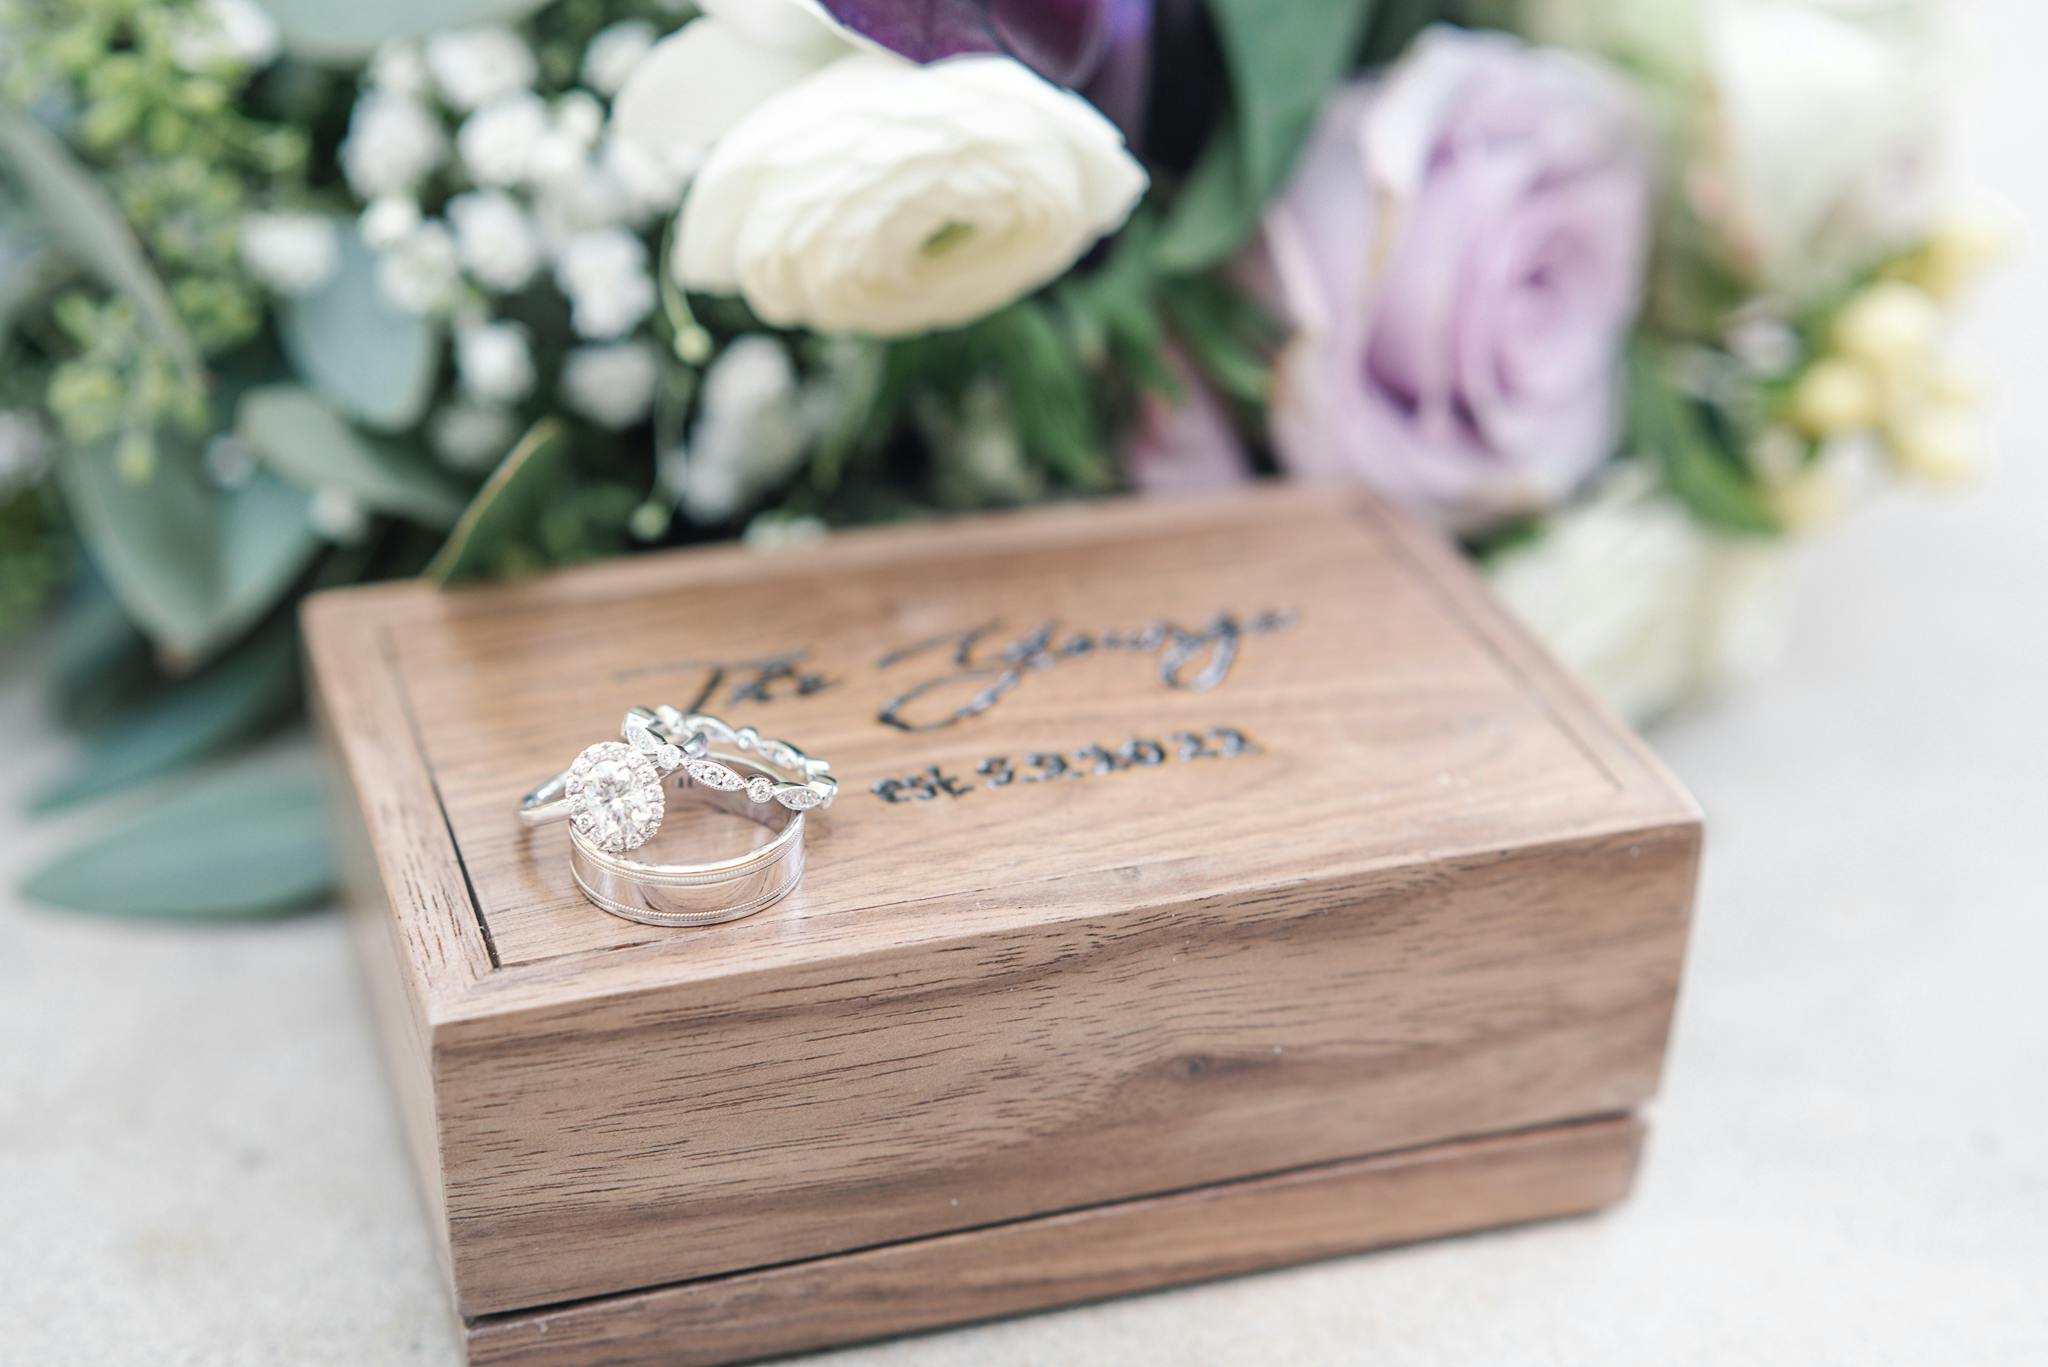 Weddings rings on a box in front of flowers